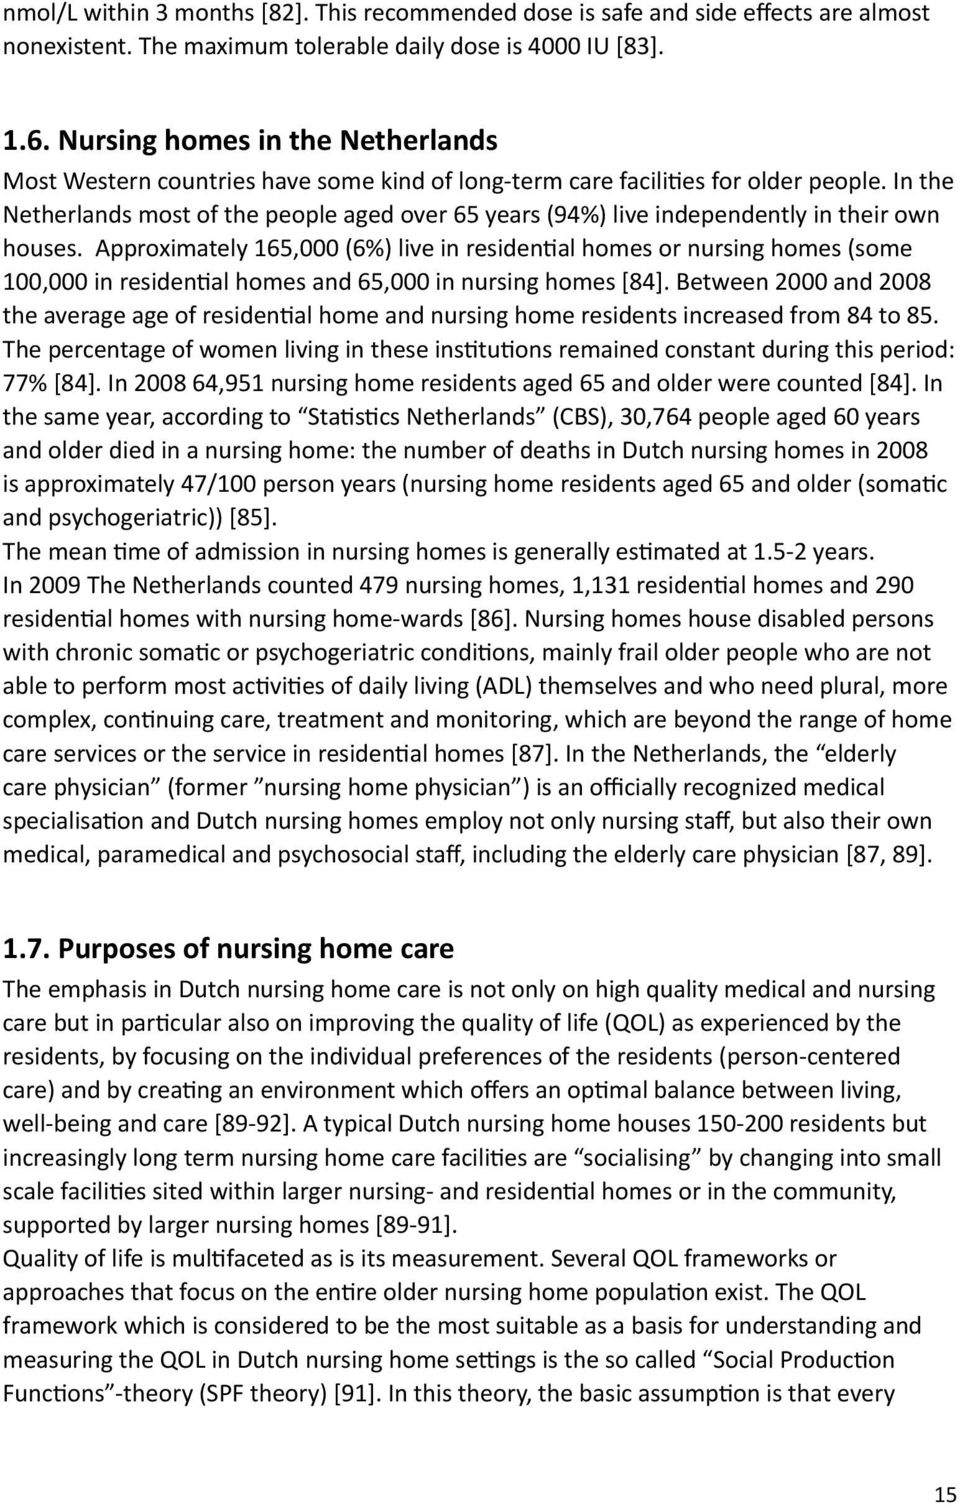 In the Netherlands most of the people aged over 65 years (94%) live independently in their own houses.